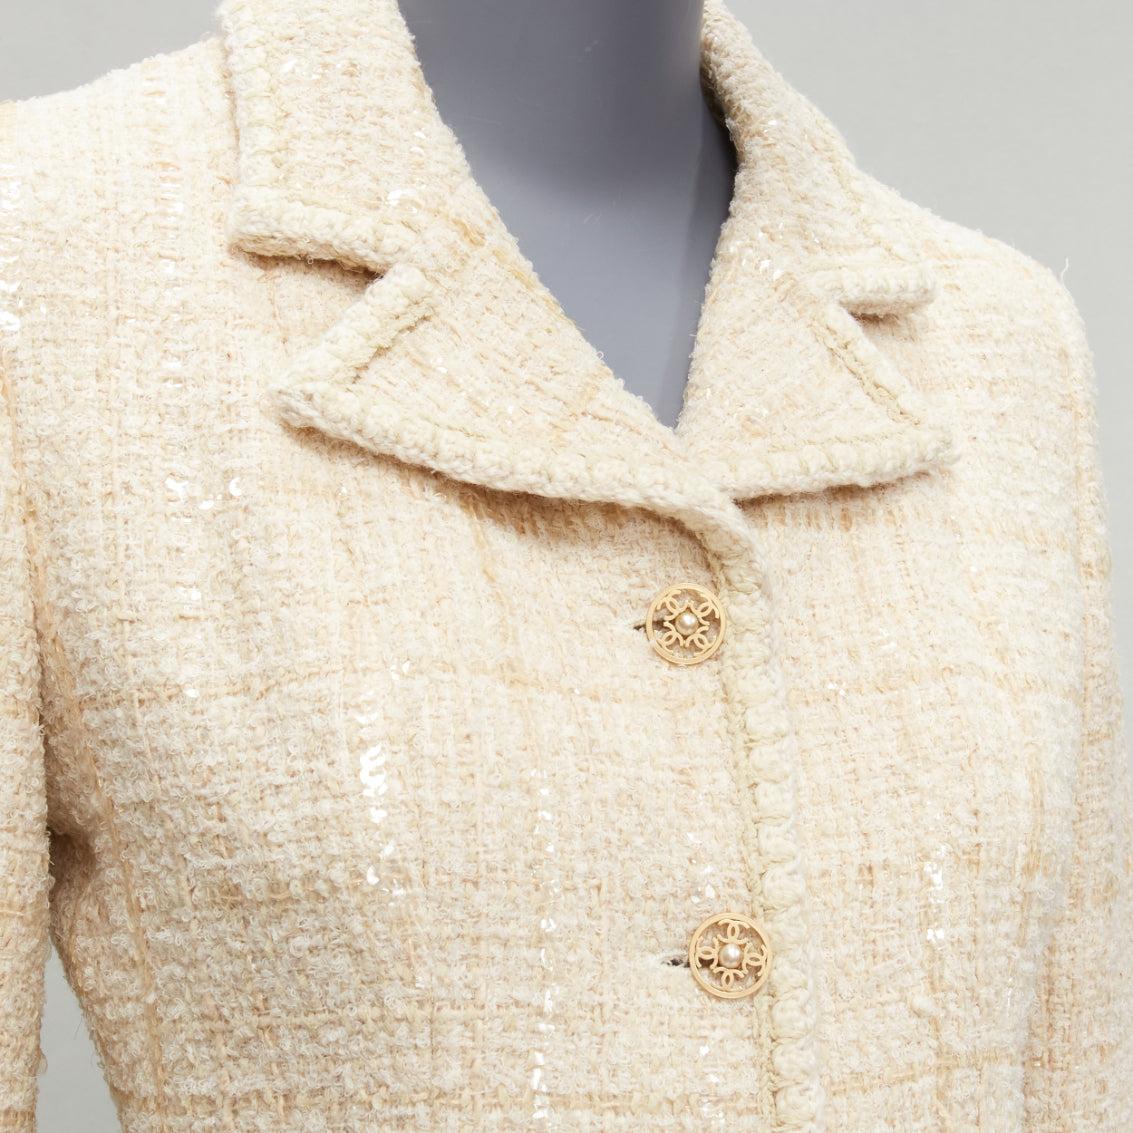 CHANEL 01A Vintage cream sequins wool tweed gold CC logo button jacket FR38 M
Reference: TGAS/D00614
Brand: Chanel
Designer: Karl Lagerfeld
Collection: 01A
Material: Wool, Blend
Color: Cream
Pattern: Tweed
Closure: Button
Lining: Cream Silk
Extra